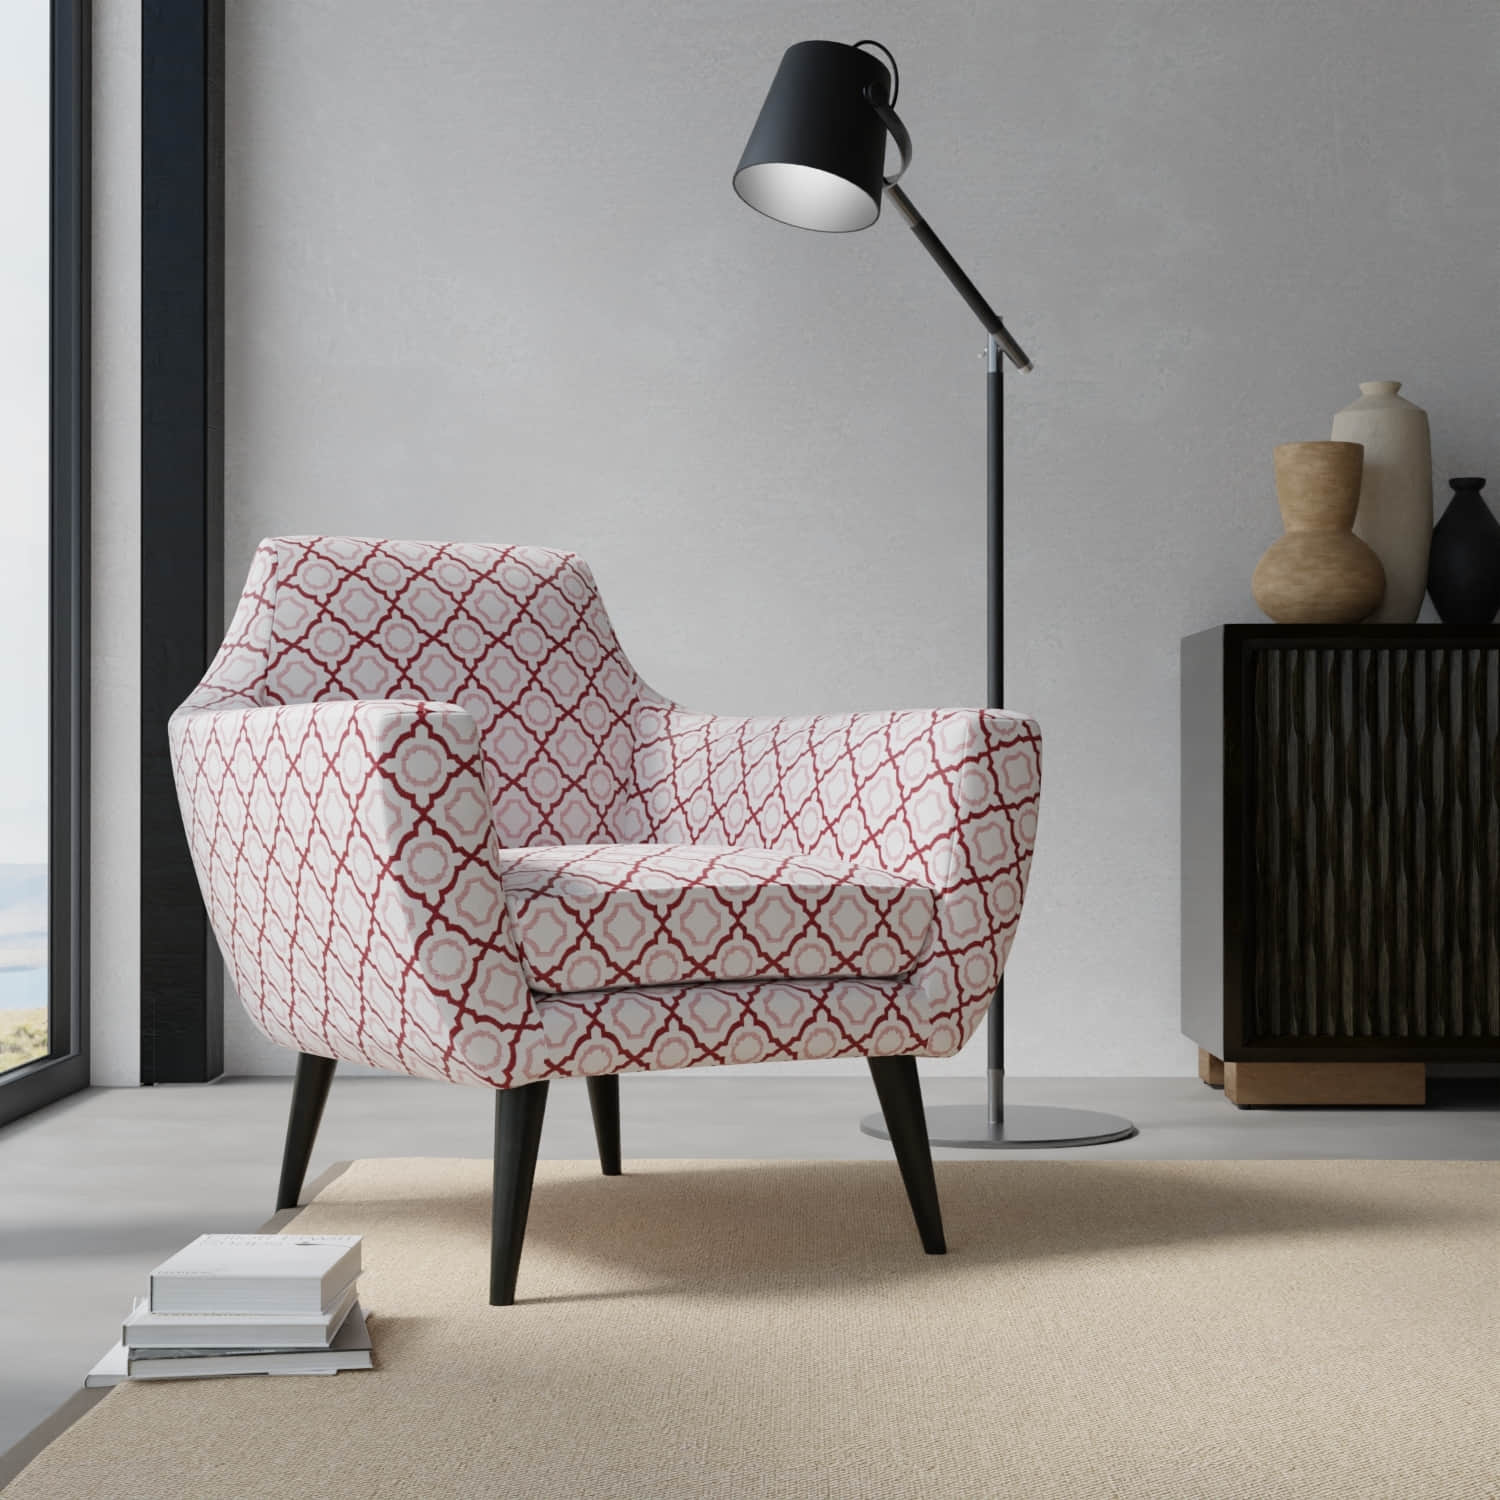 Morgan Scarlet upholstered on a contemporary chair